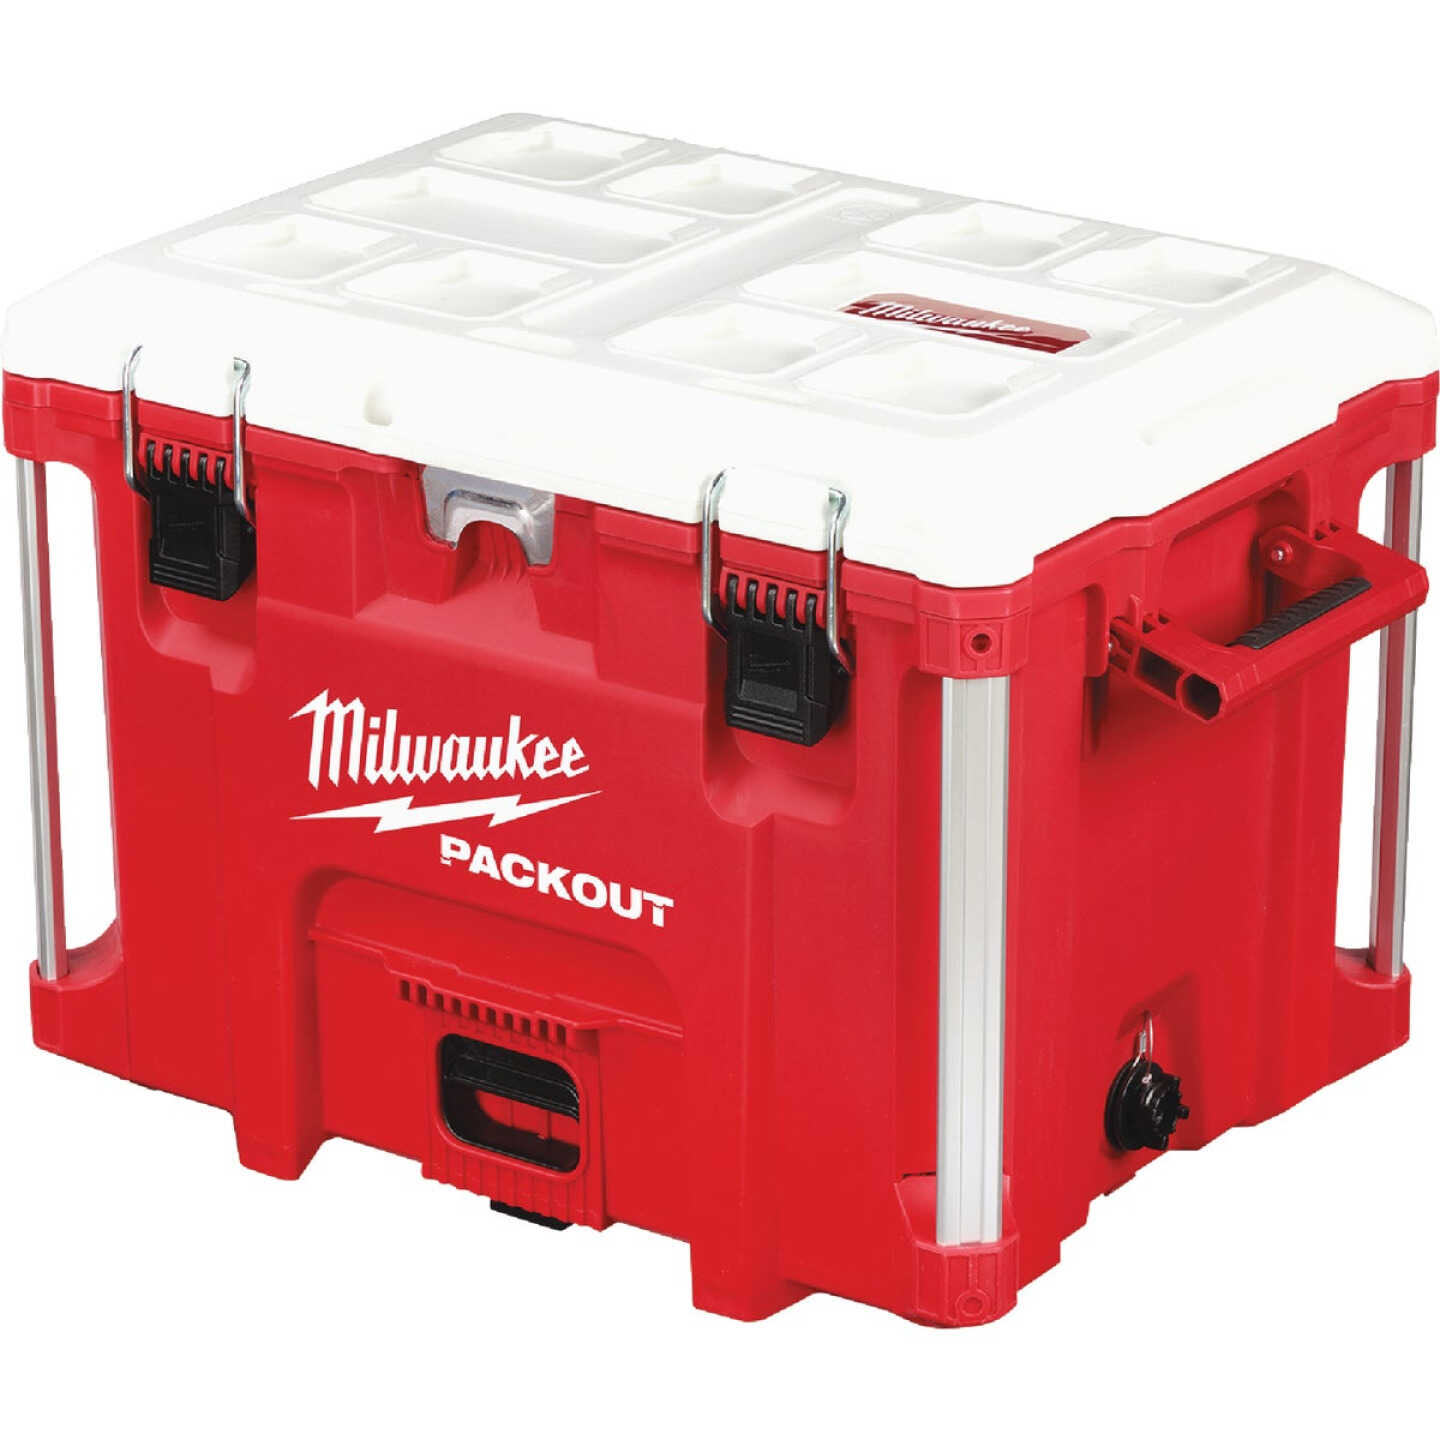 Milwaukee PACKOUT 40 Qt. XL Cooler, Red - Anderson Lumber